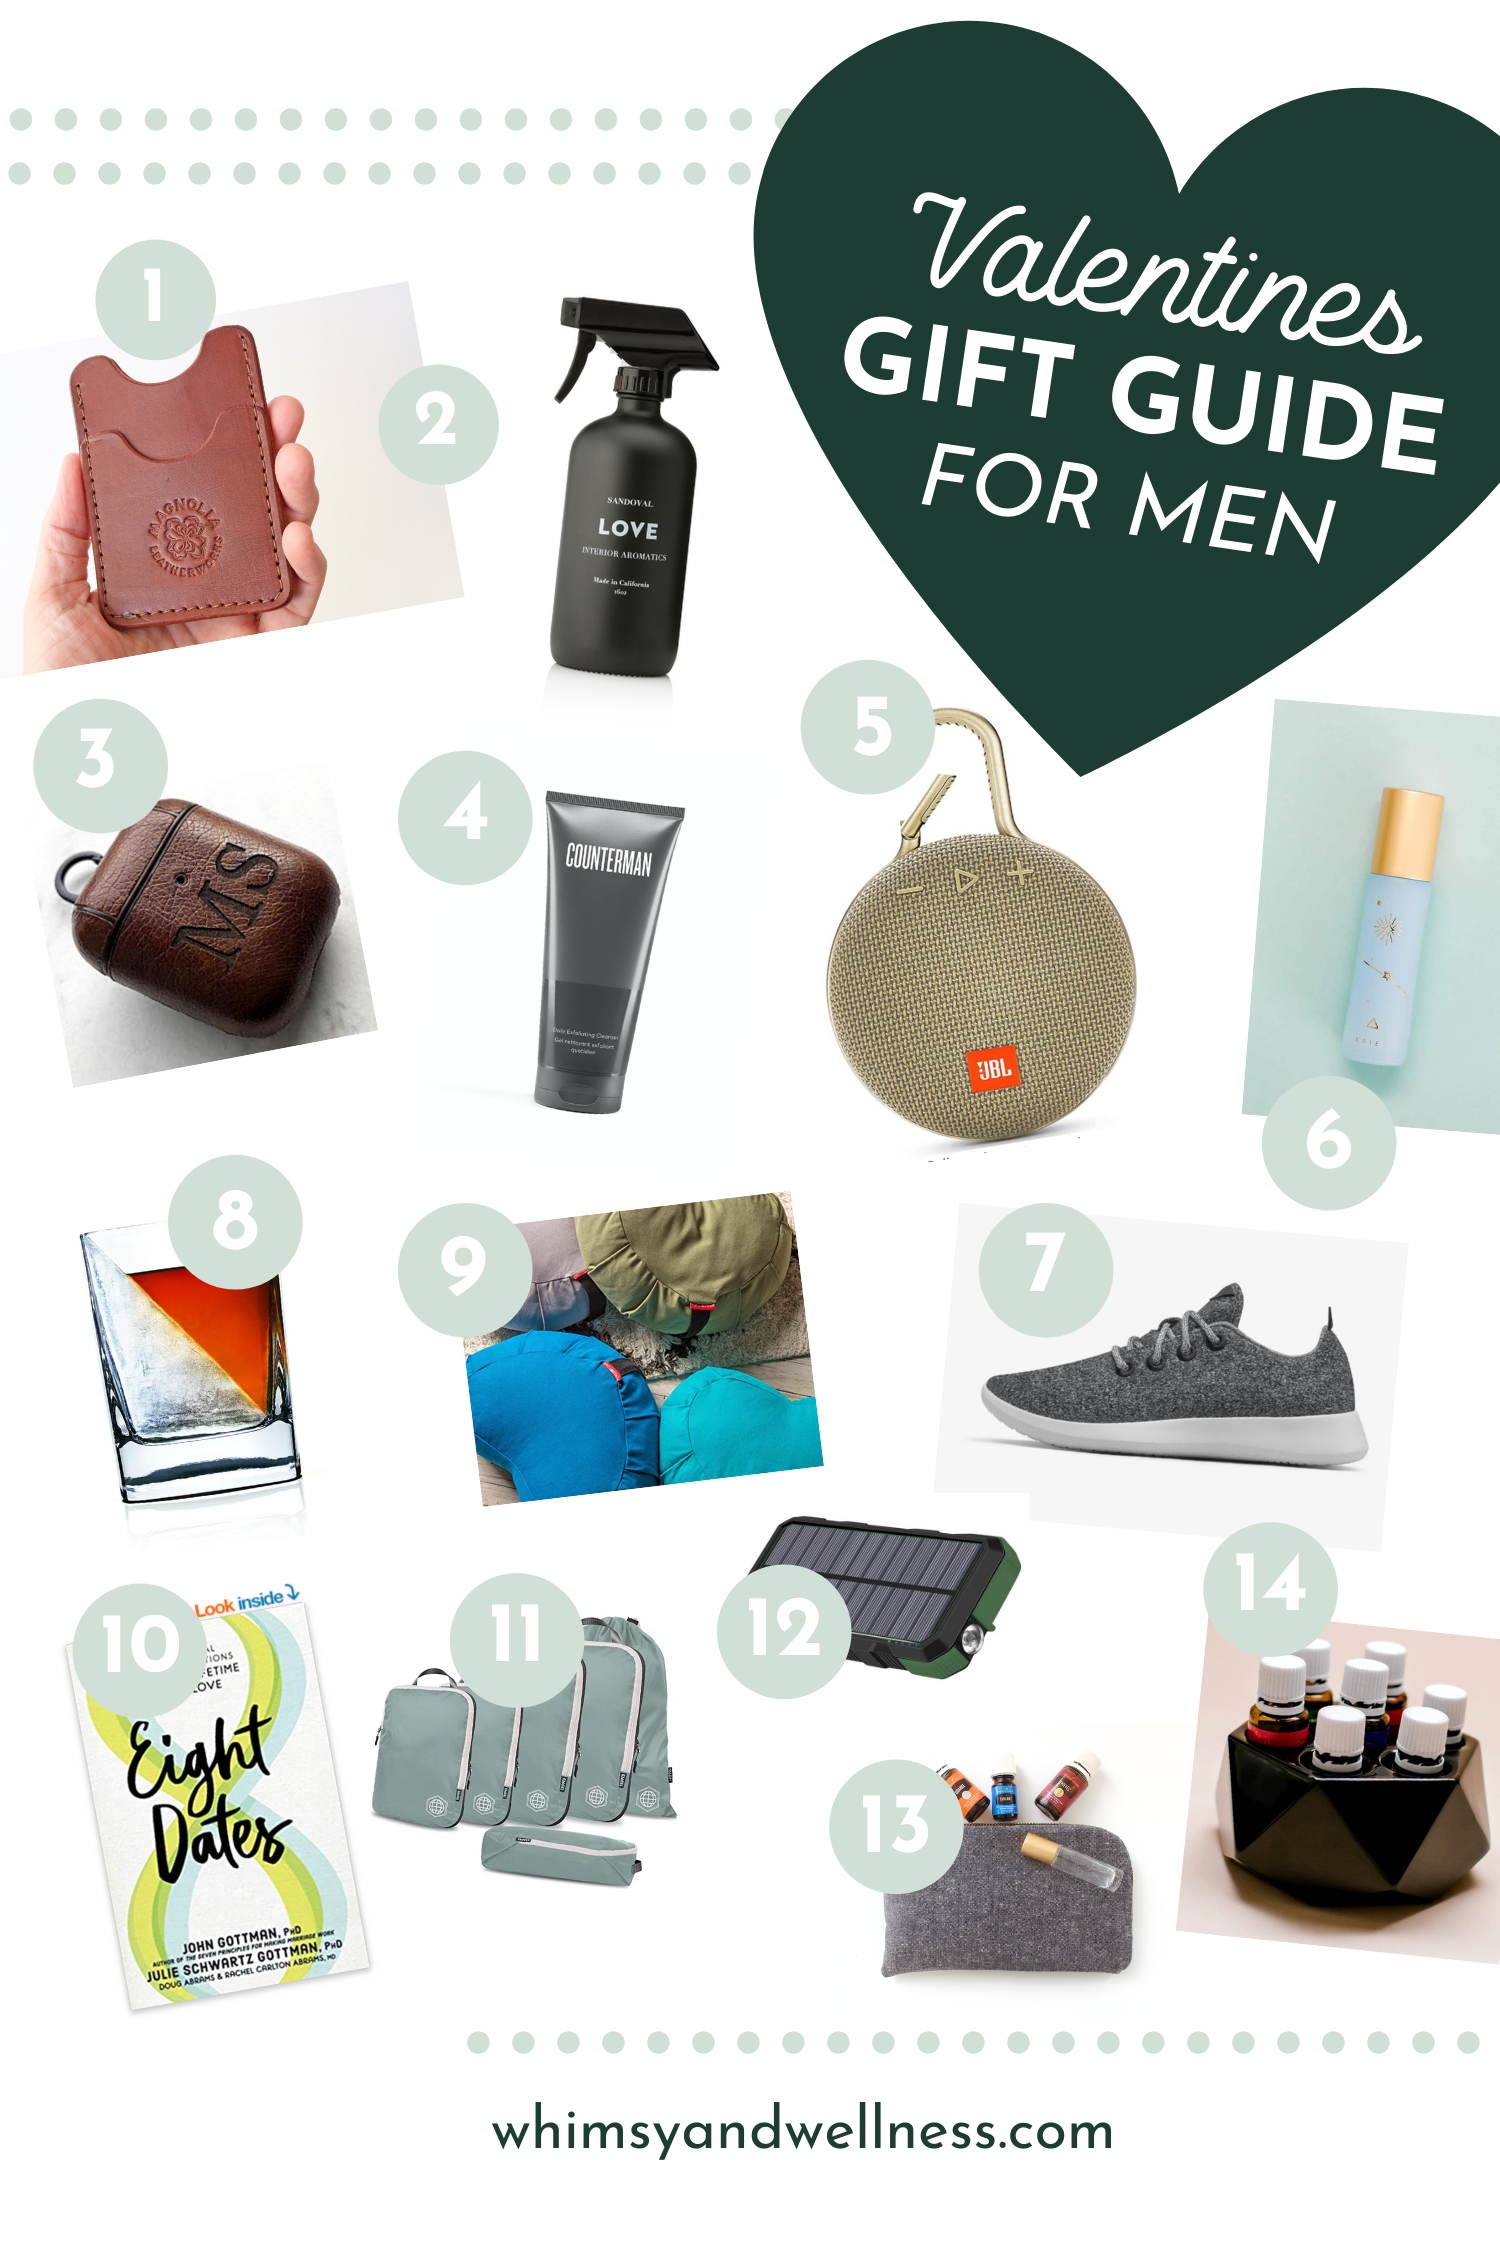 The Best Valentine's Day Gifts For Men in 2021 - Whimsy + Wellness